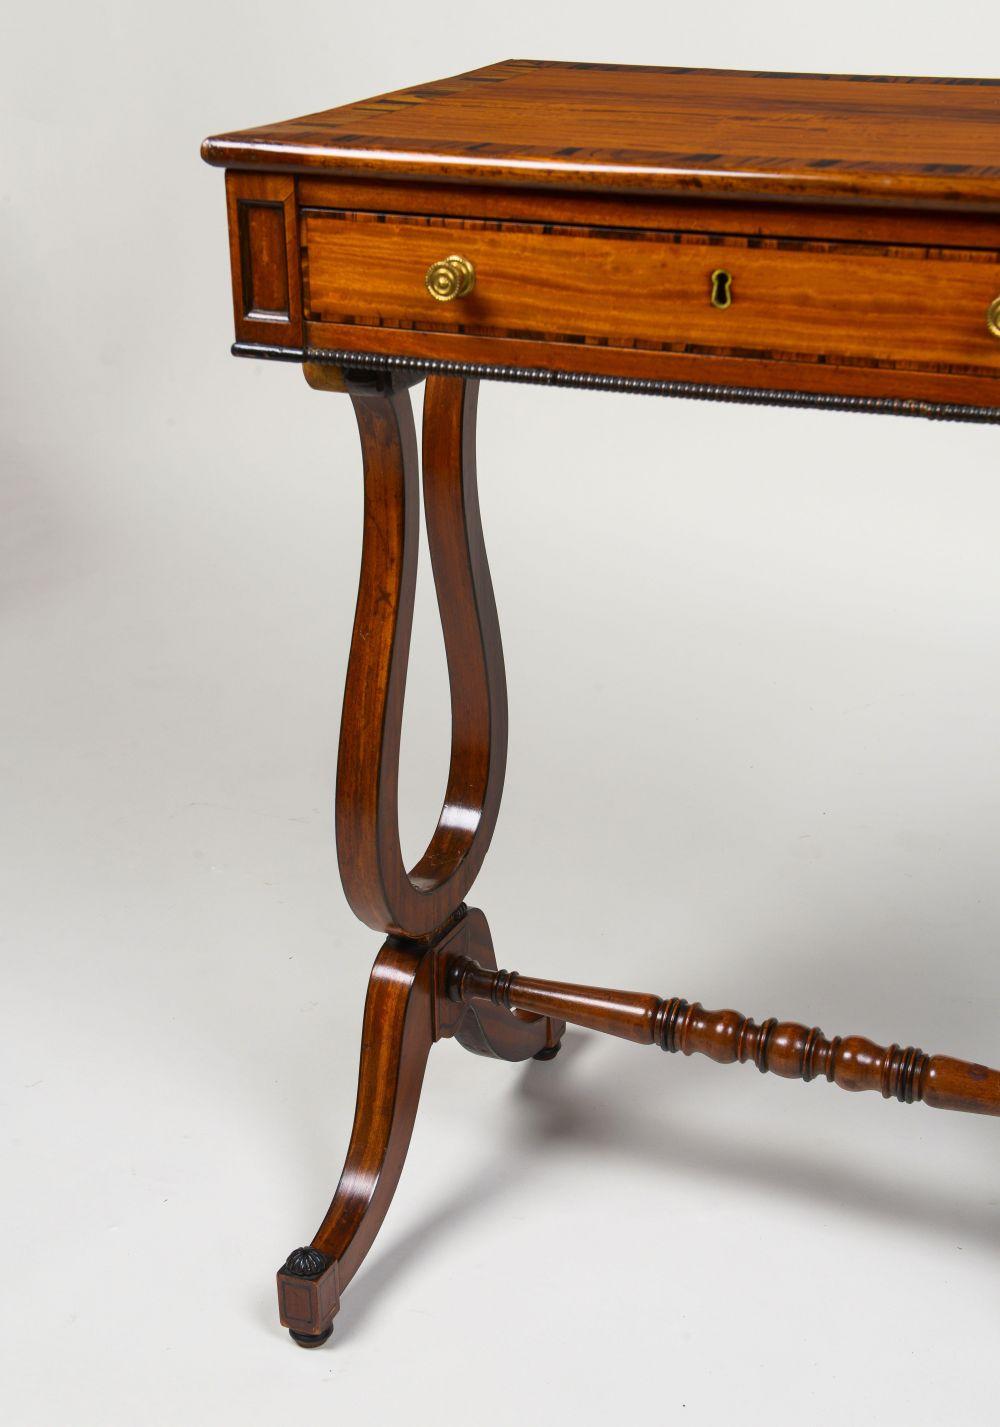 A Fine Regency Satinwood and Calamander Work Table In Good Condition For Sale In New York, NY